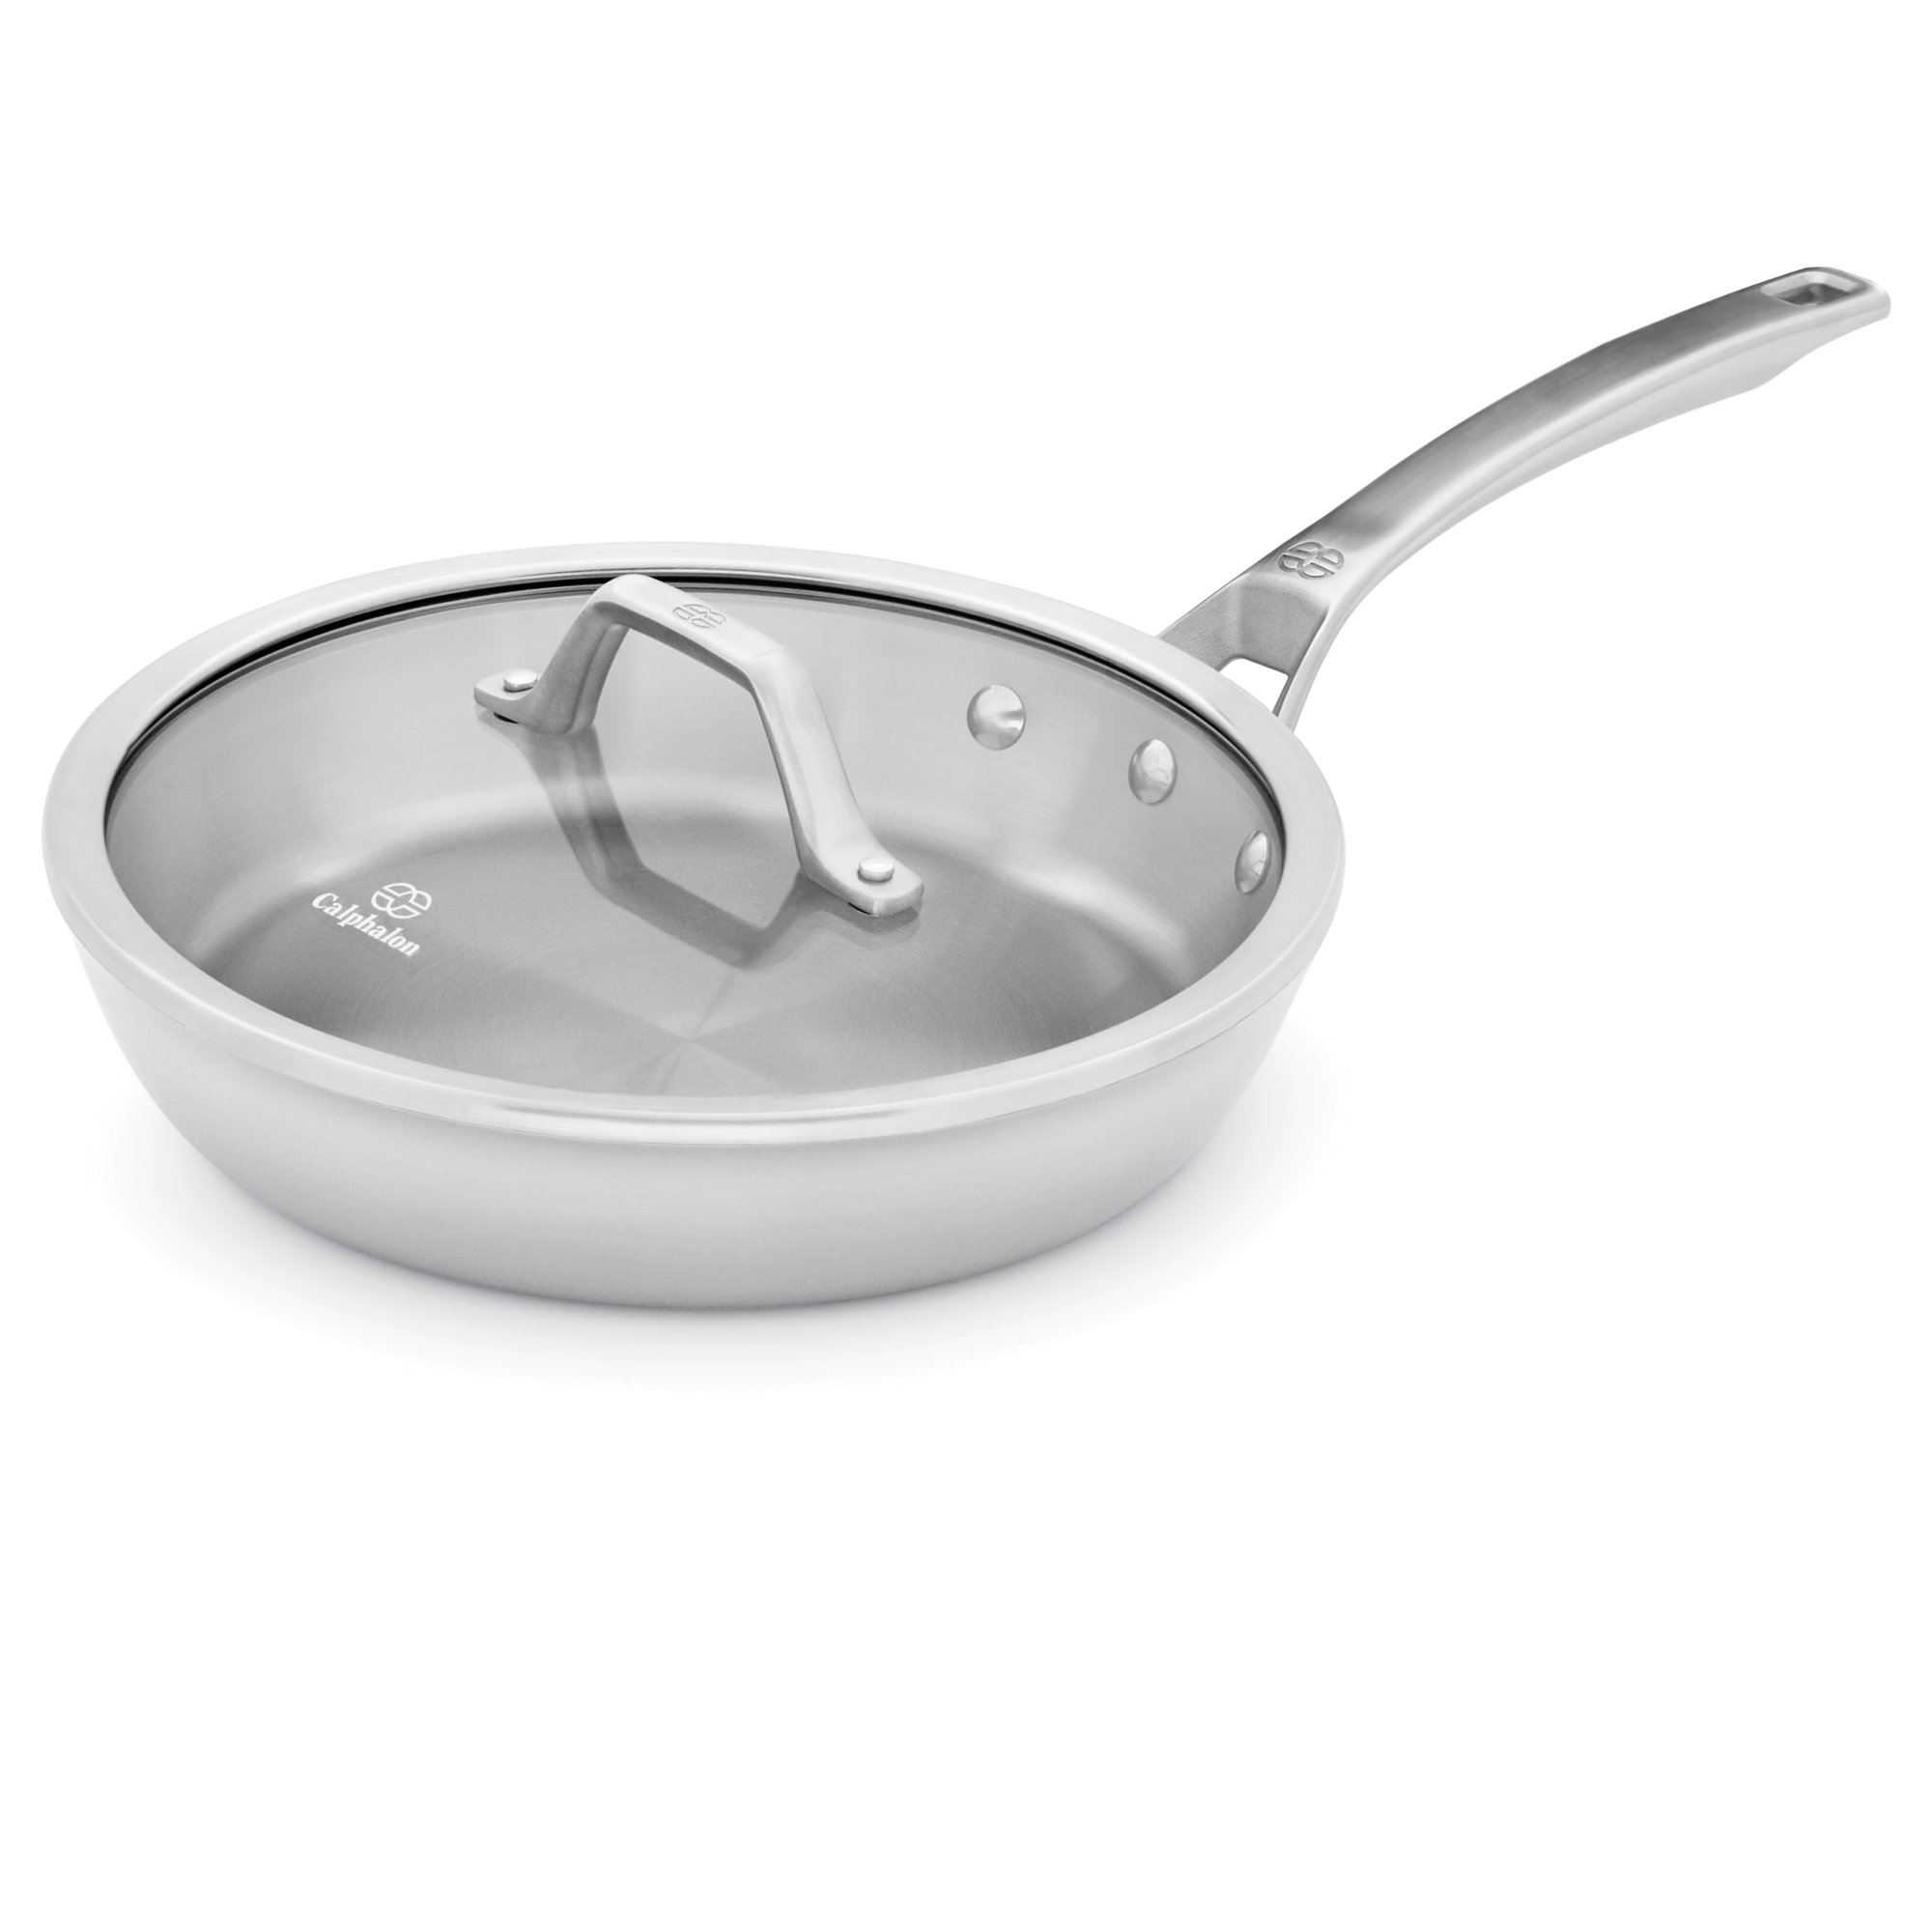 Calphalon Signature™ Stainless Steel 10-in. Skillet Pan with Cover Calphalon 10 Inch Pan Stainless Steel